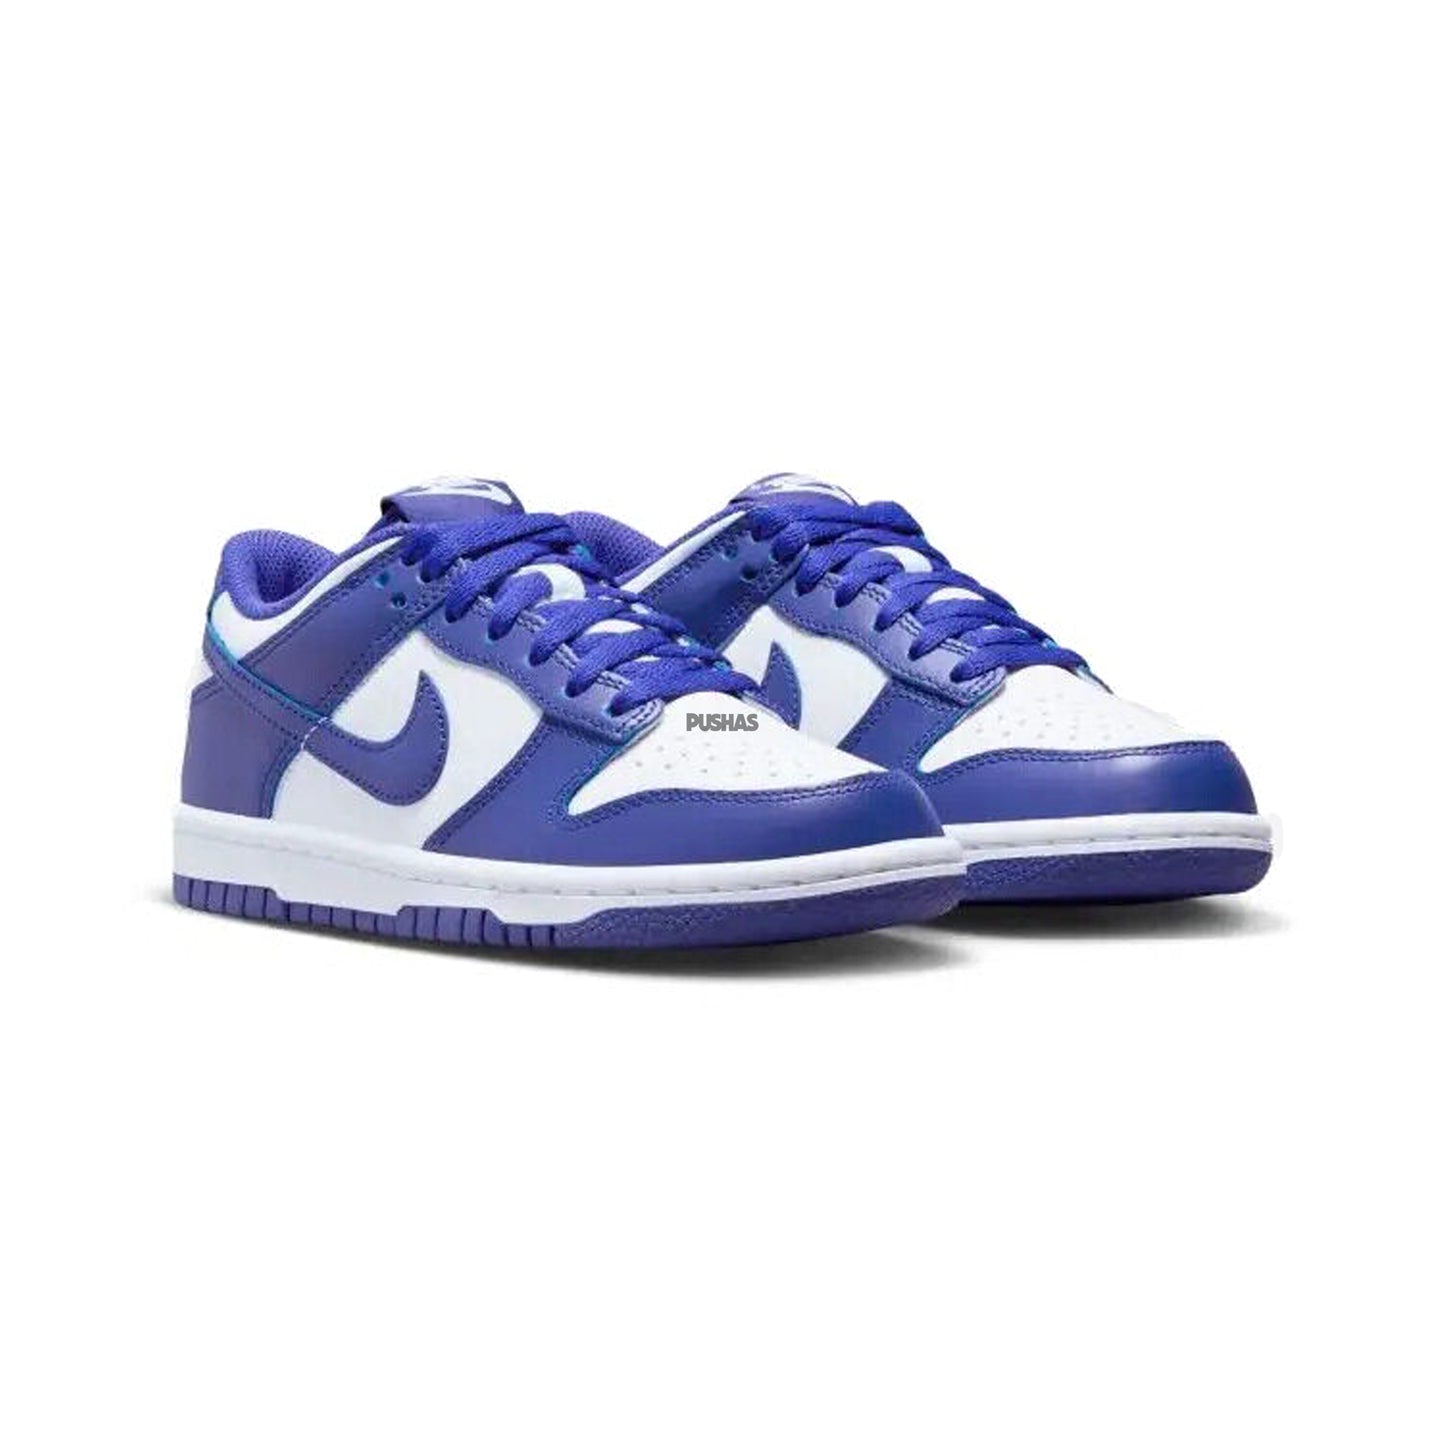 Nike Dunk Low 'Concord' GS